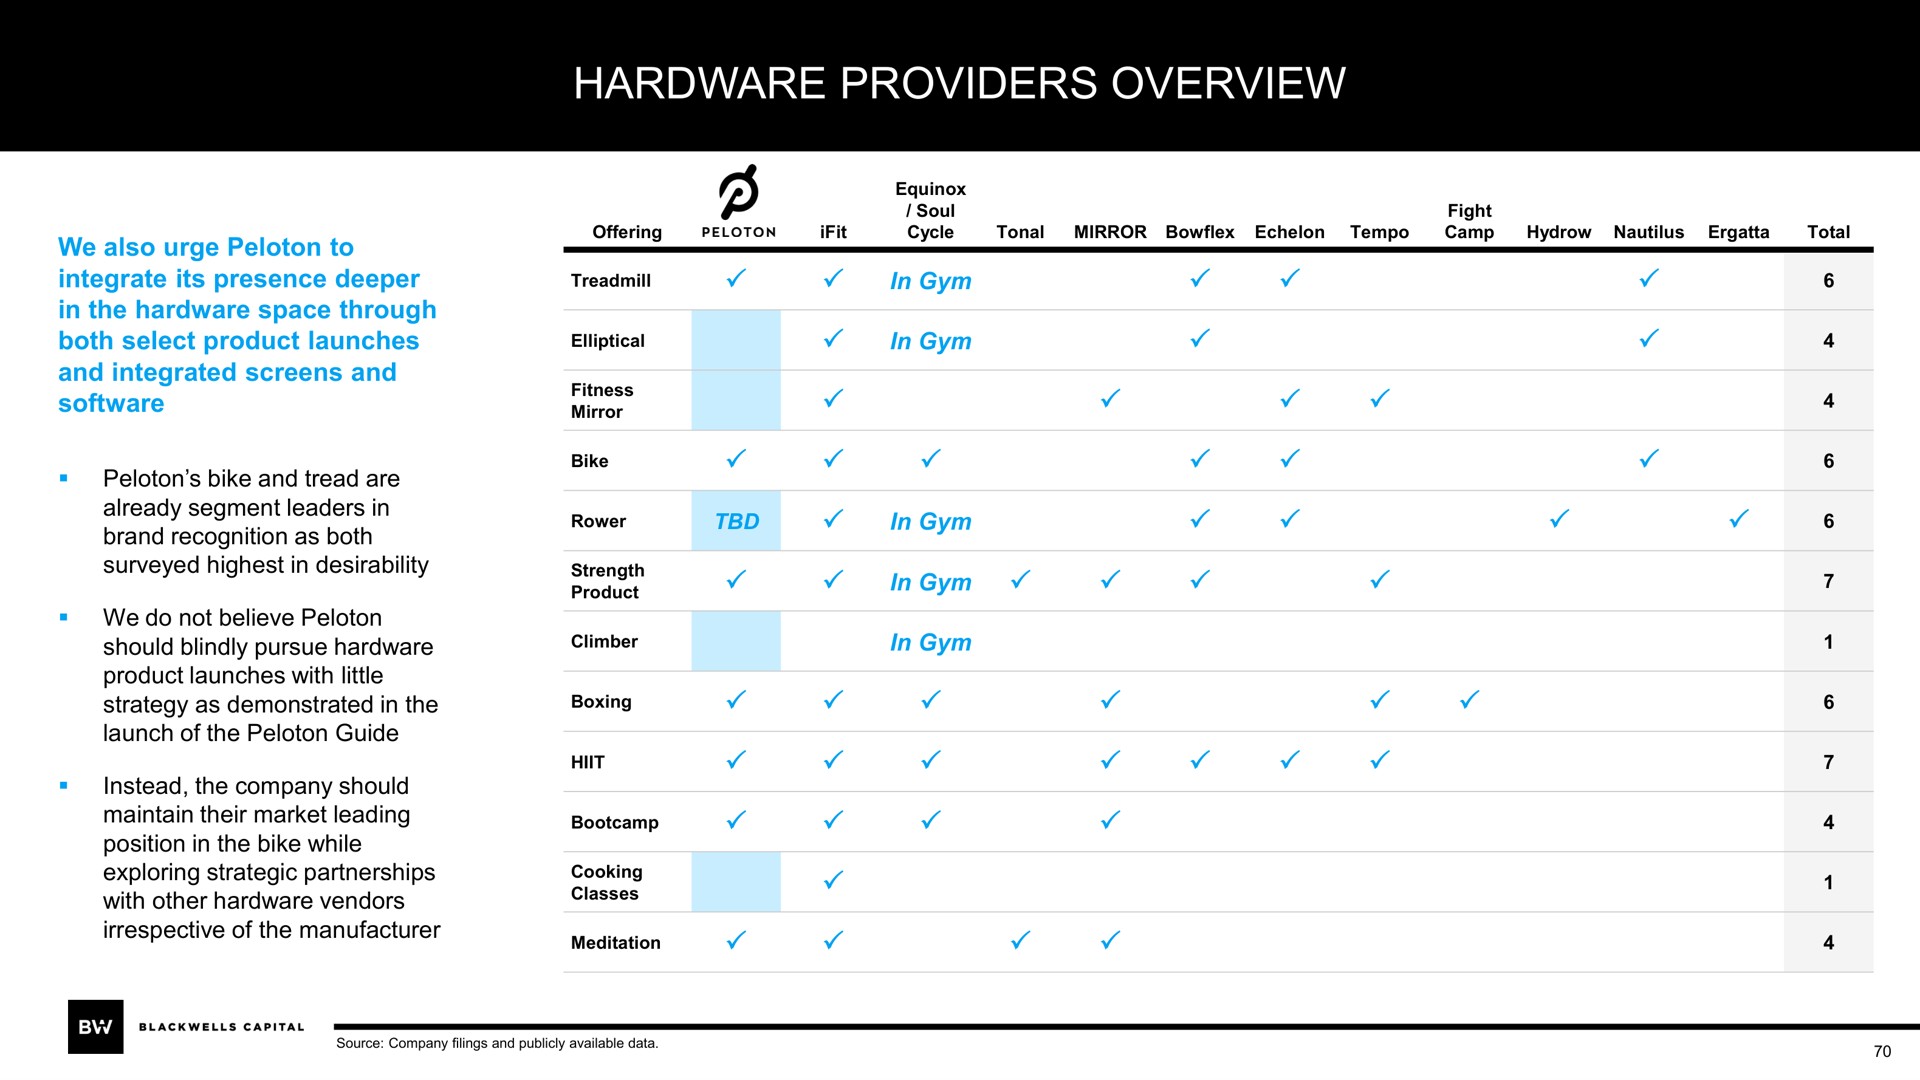 hardware providers overview | Blackwells Capital